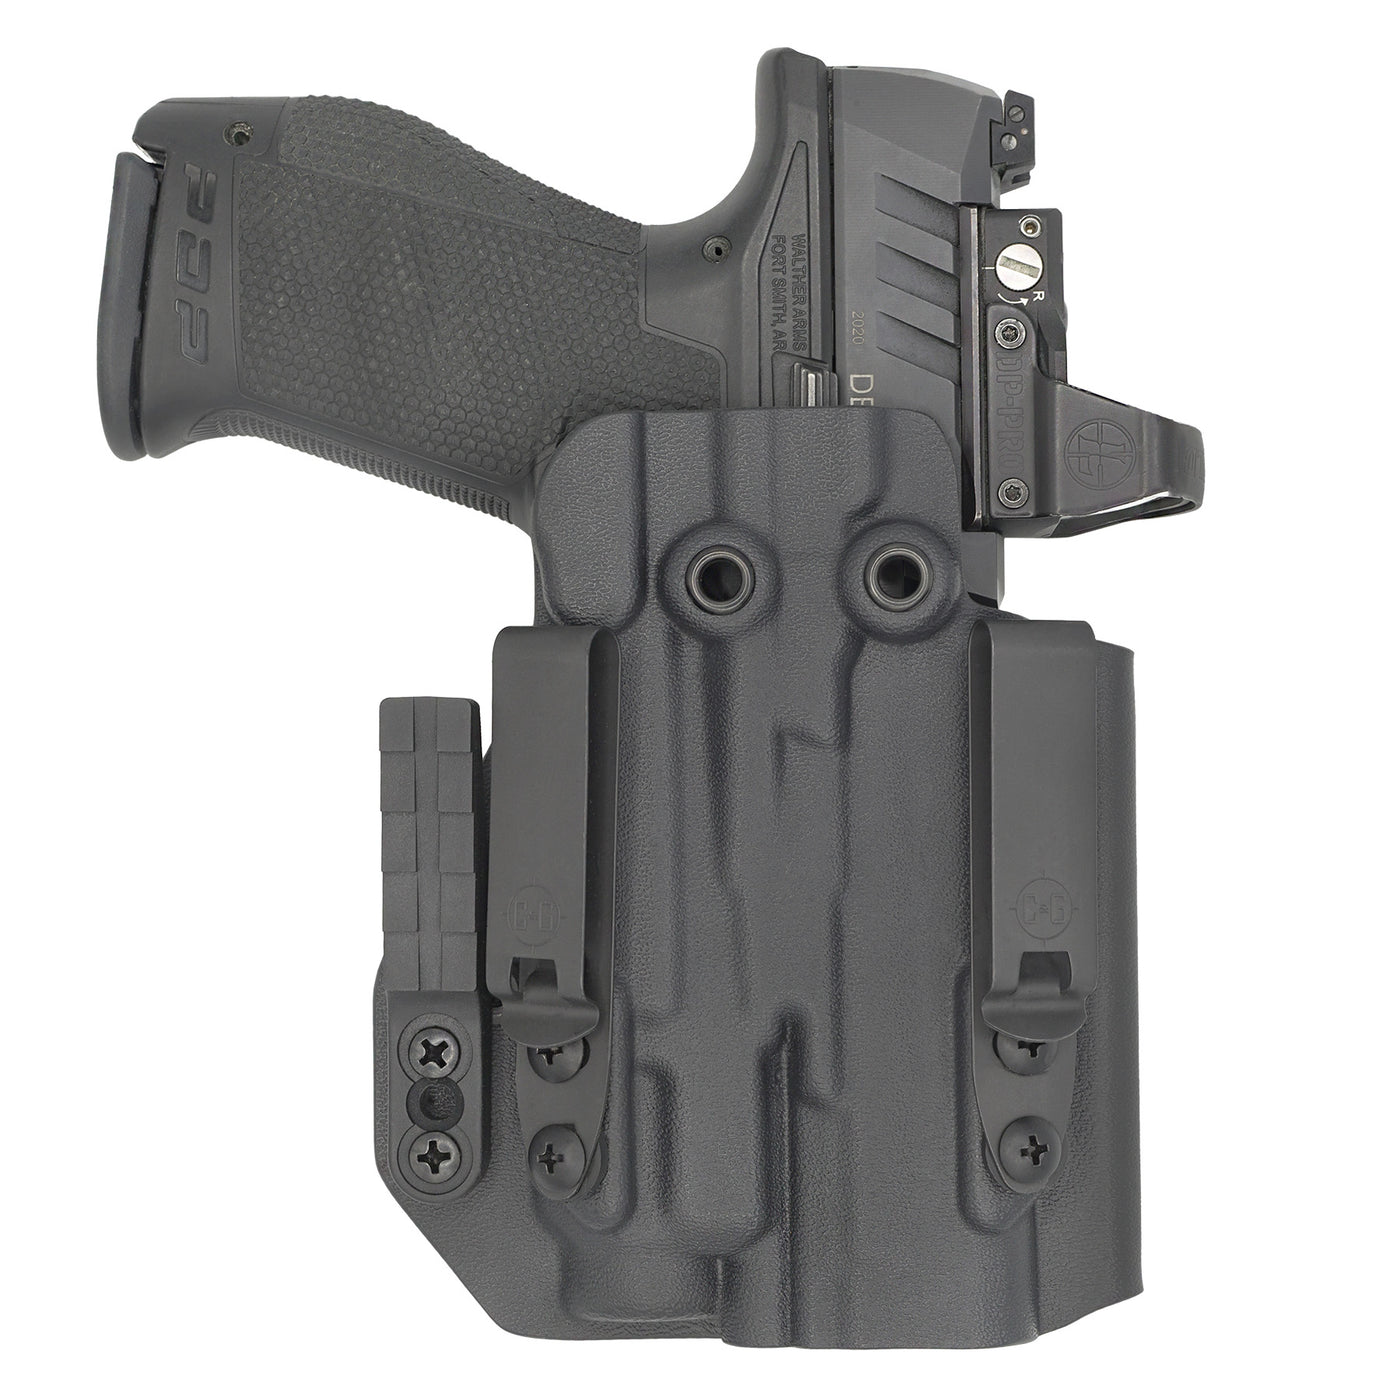 C&G Holsters custom IWB ALPHA UPGRADE Tactical Walther pdp streamlight TLR7/a in holstered position